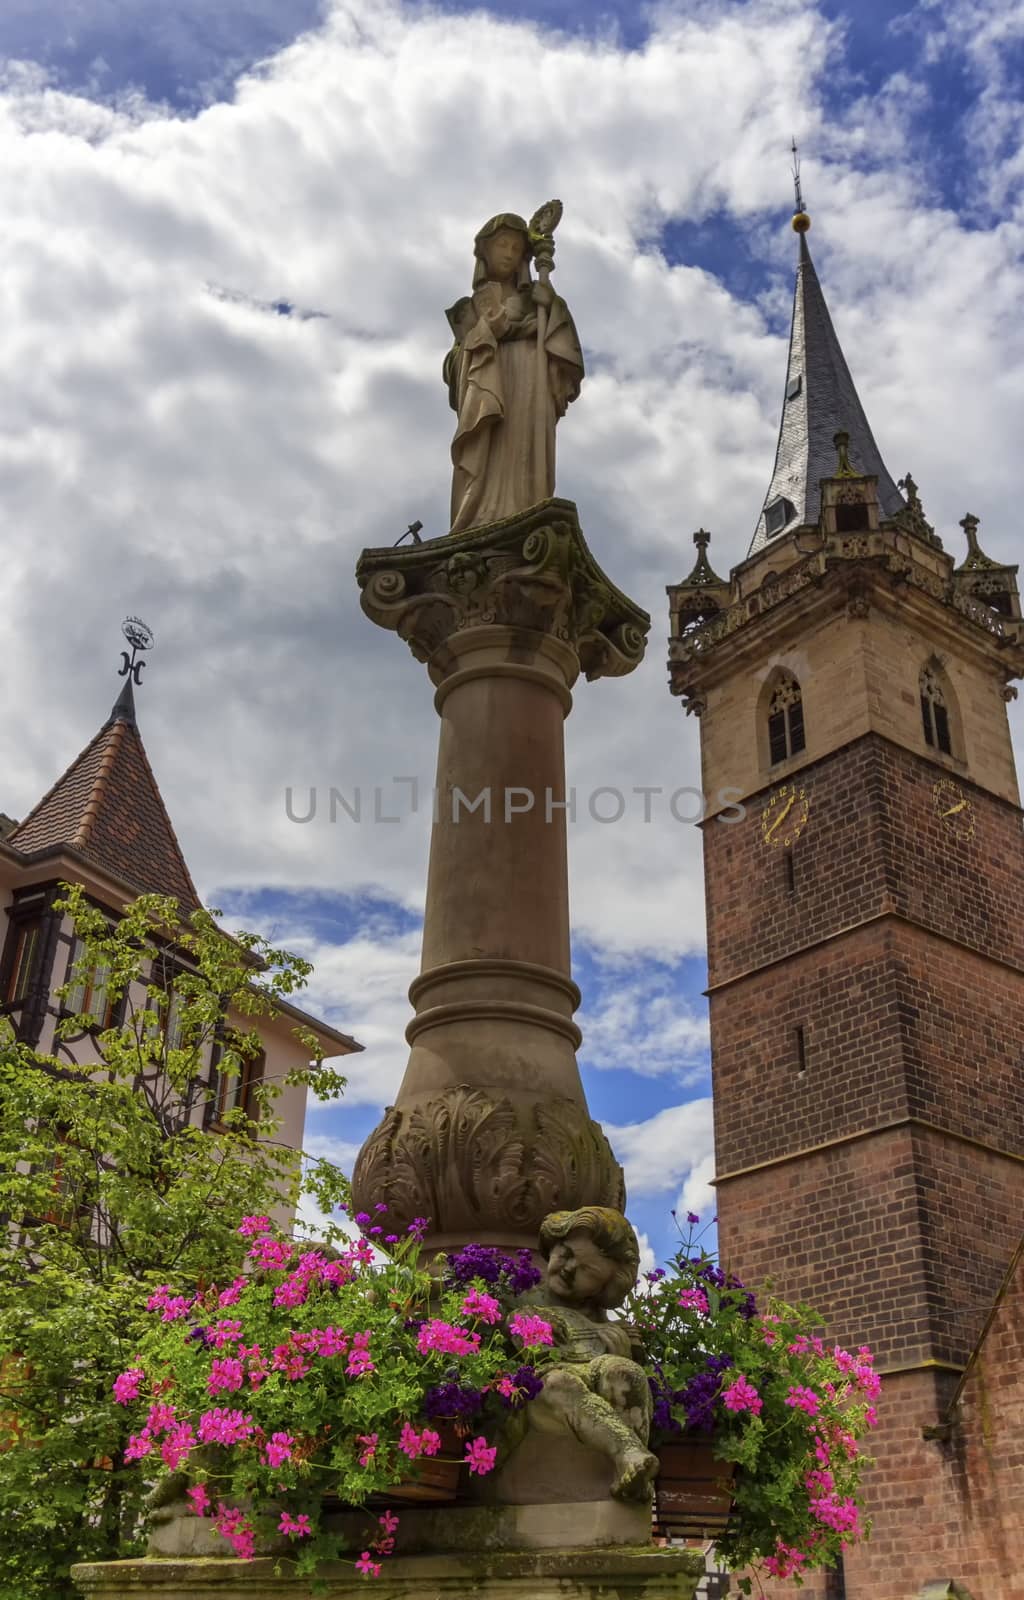 Sainte-Odile fountain and Kappelturm in Obernai village by day, Alsace, France